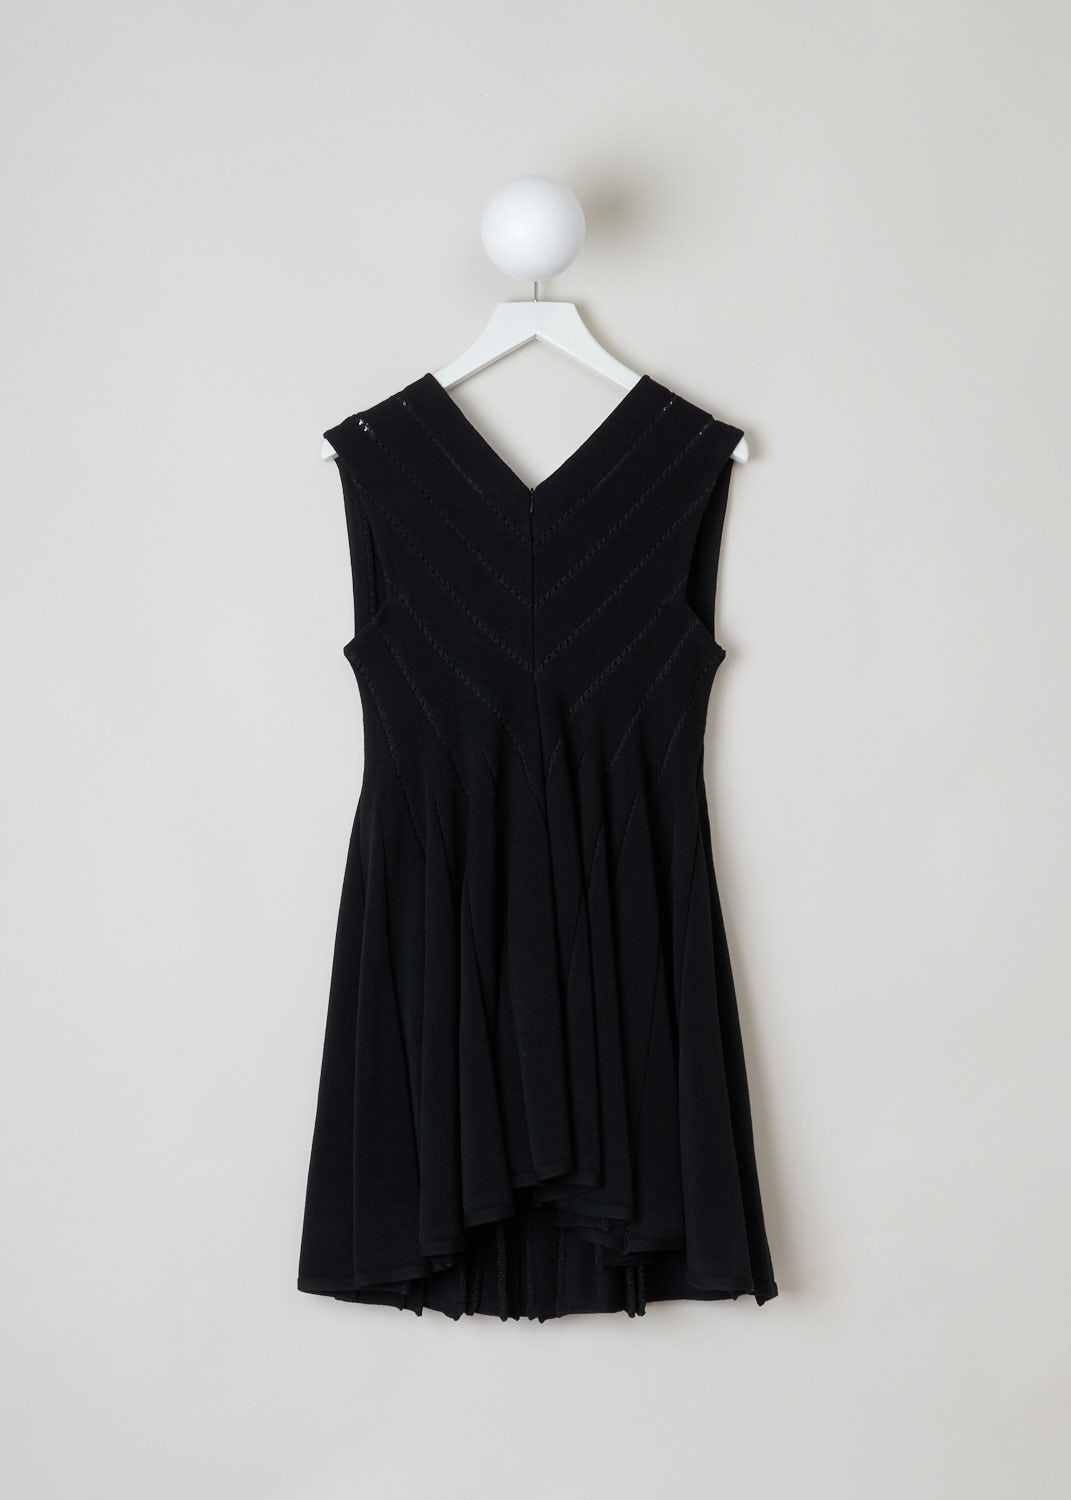 AlaÃ¯a, Black babydoll dress with embroidered detailing, 4W9RB20CM120_baby_doll_SM_noir_C999, black, back, Black babydoll dress featuring a square cut neckline on the front and a v-shape on the back. The top of this dress is put together in strips of fabric held together by the black embroidery. The skirt of this model is designed with knife pleats and will flare out. The length of this model is thigh-height. Your fastening option on this model is the concealed zipper on the back.  